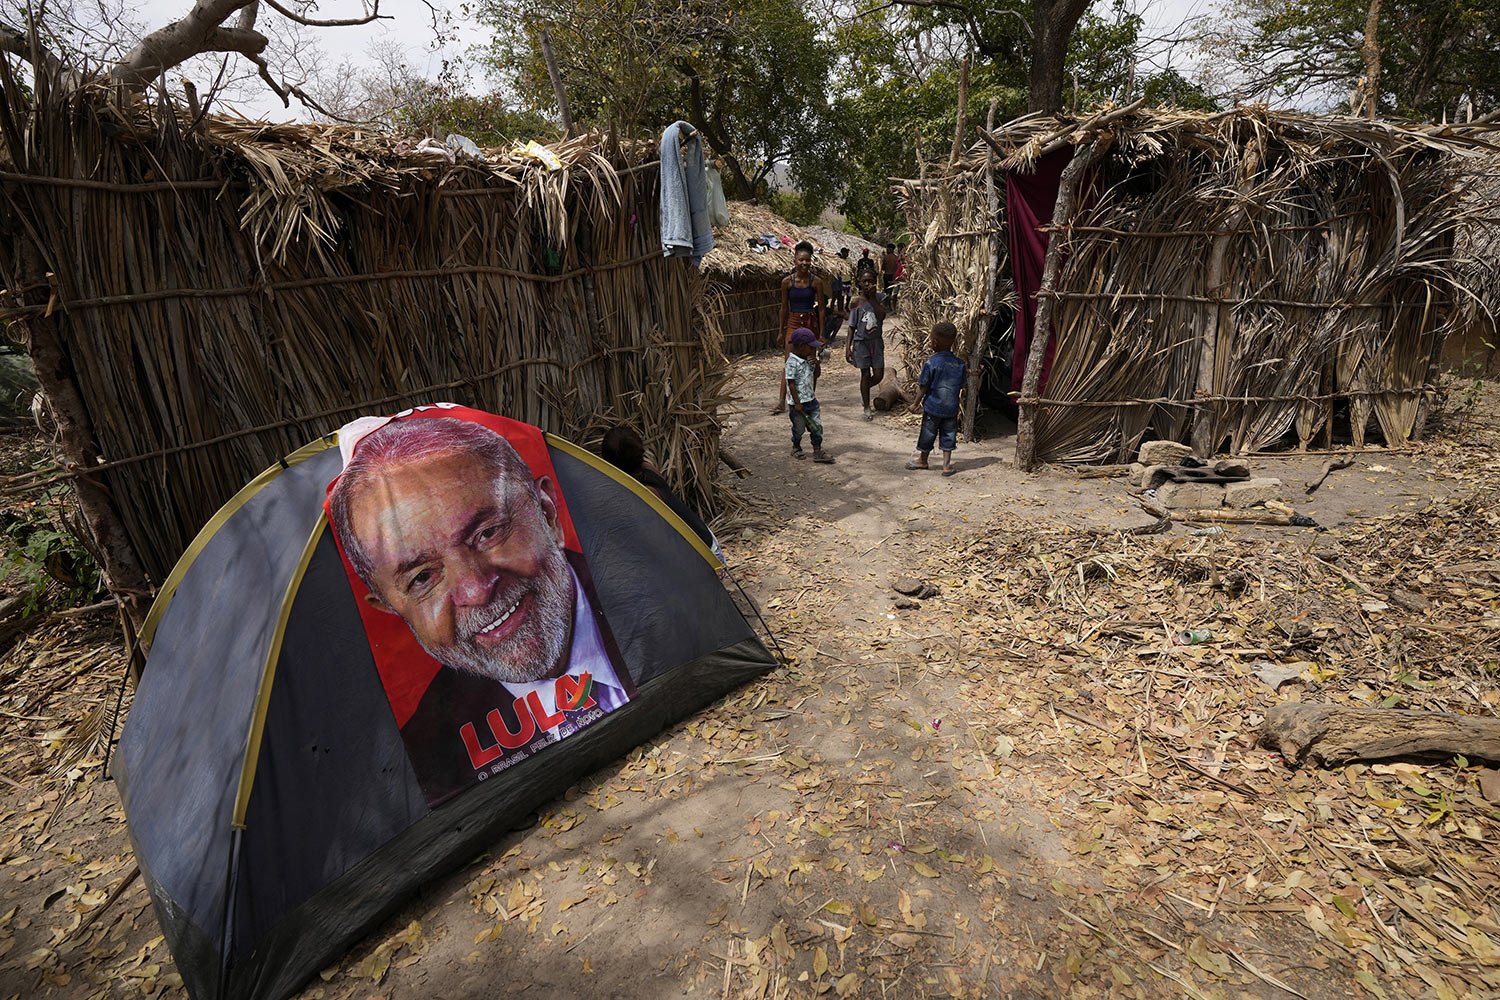  A towel emblazoned with an image of Brazil's former President Luiz Inacio Lula da Silva, who is running for reelection, is draped over a tent during the culmination of the week-long pilgrimage and celebration for the patron saint "Nossa Senhora da A